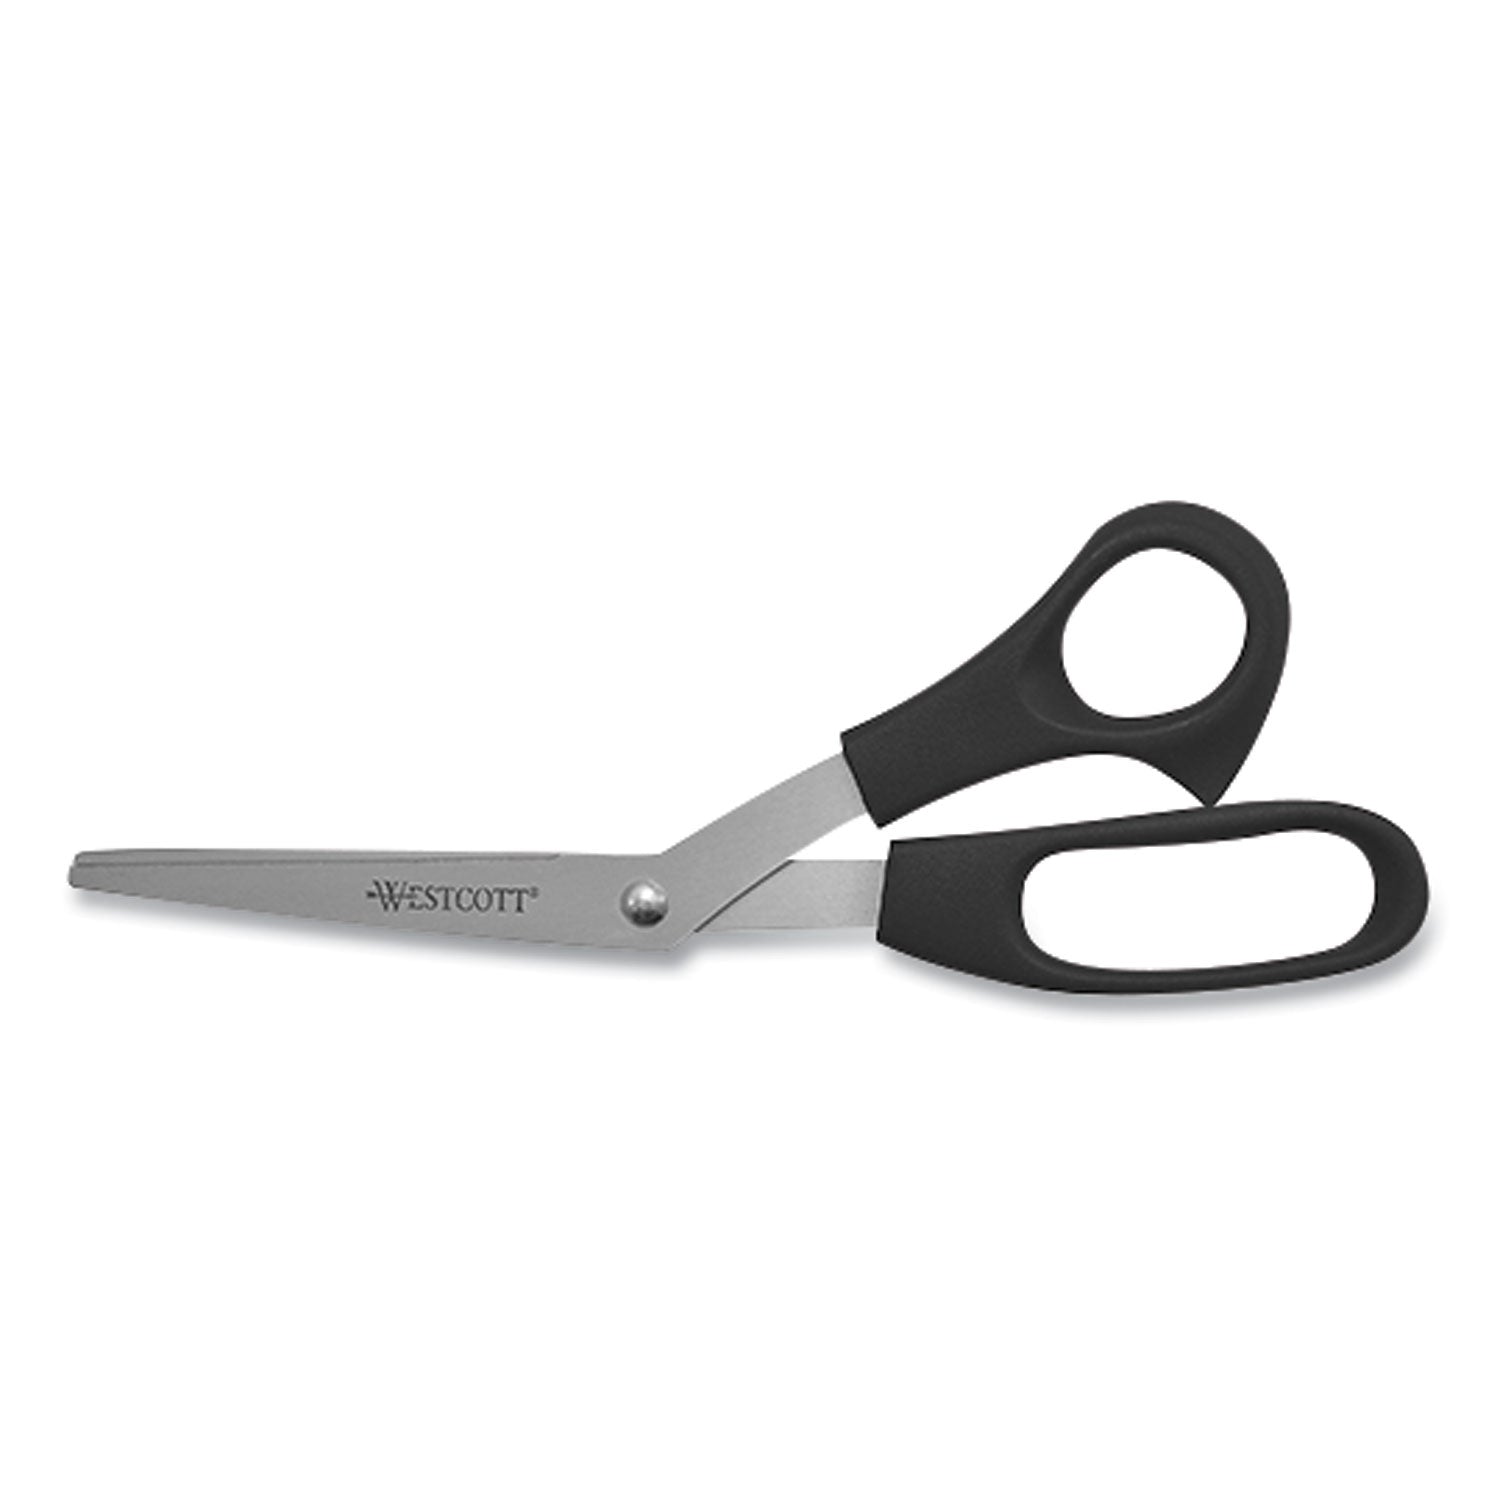 all-purpose-value-stainless-steel-scissors-three-pack-8-long-3-cut-length-assorted-color-offset-handles-3-pack_wtc13023 - 5